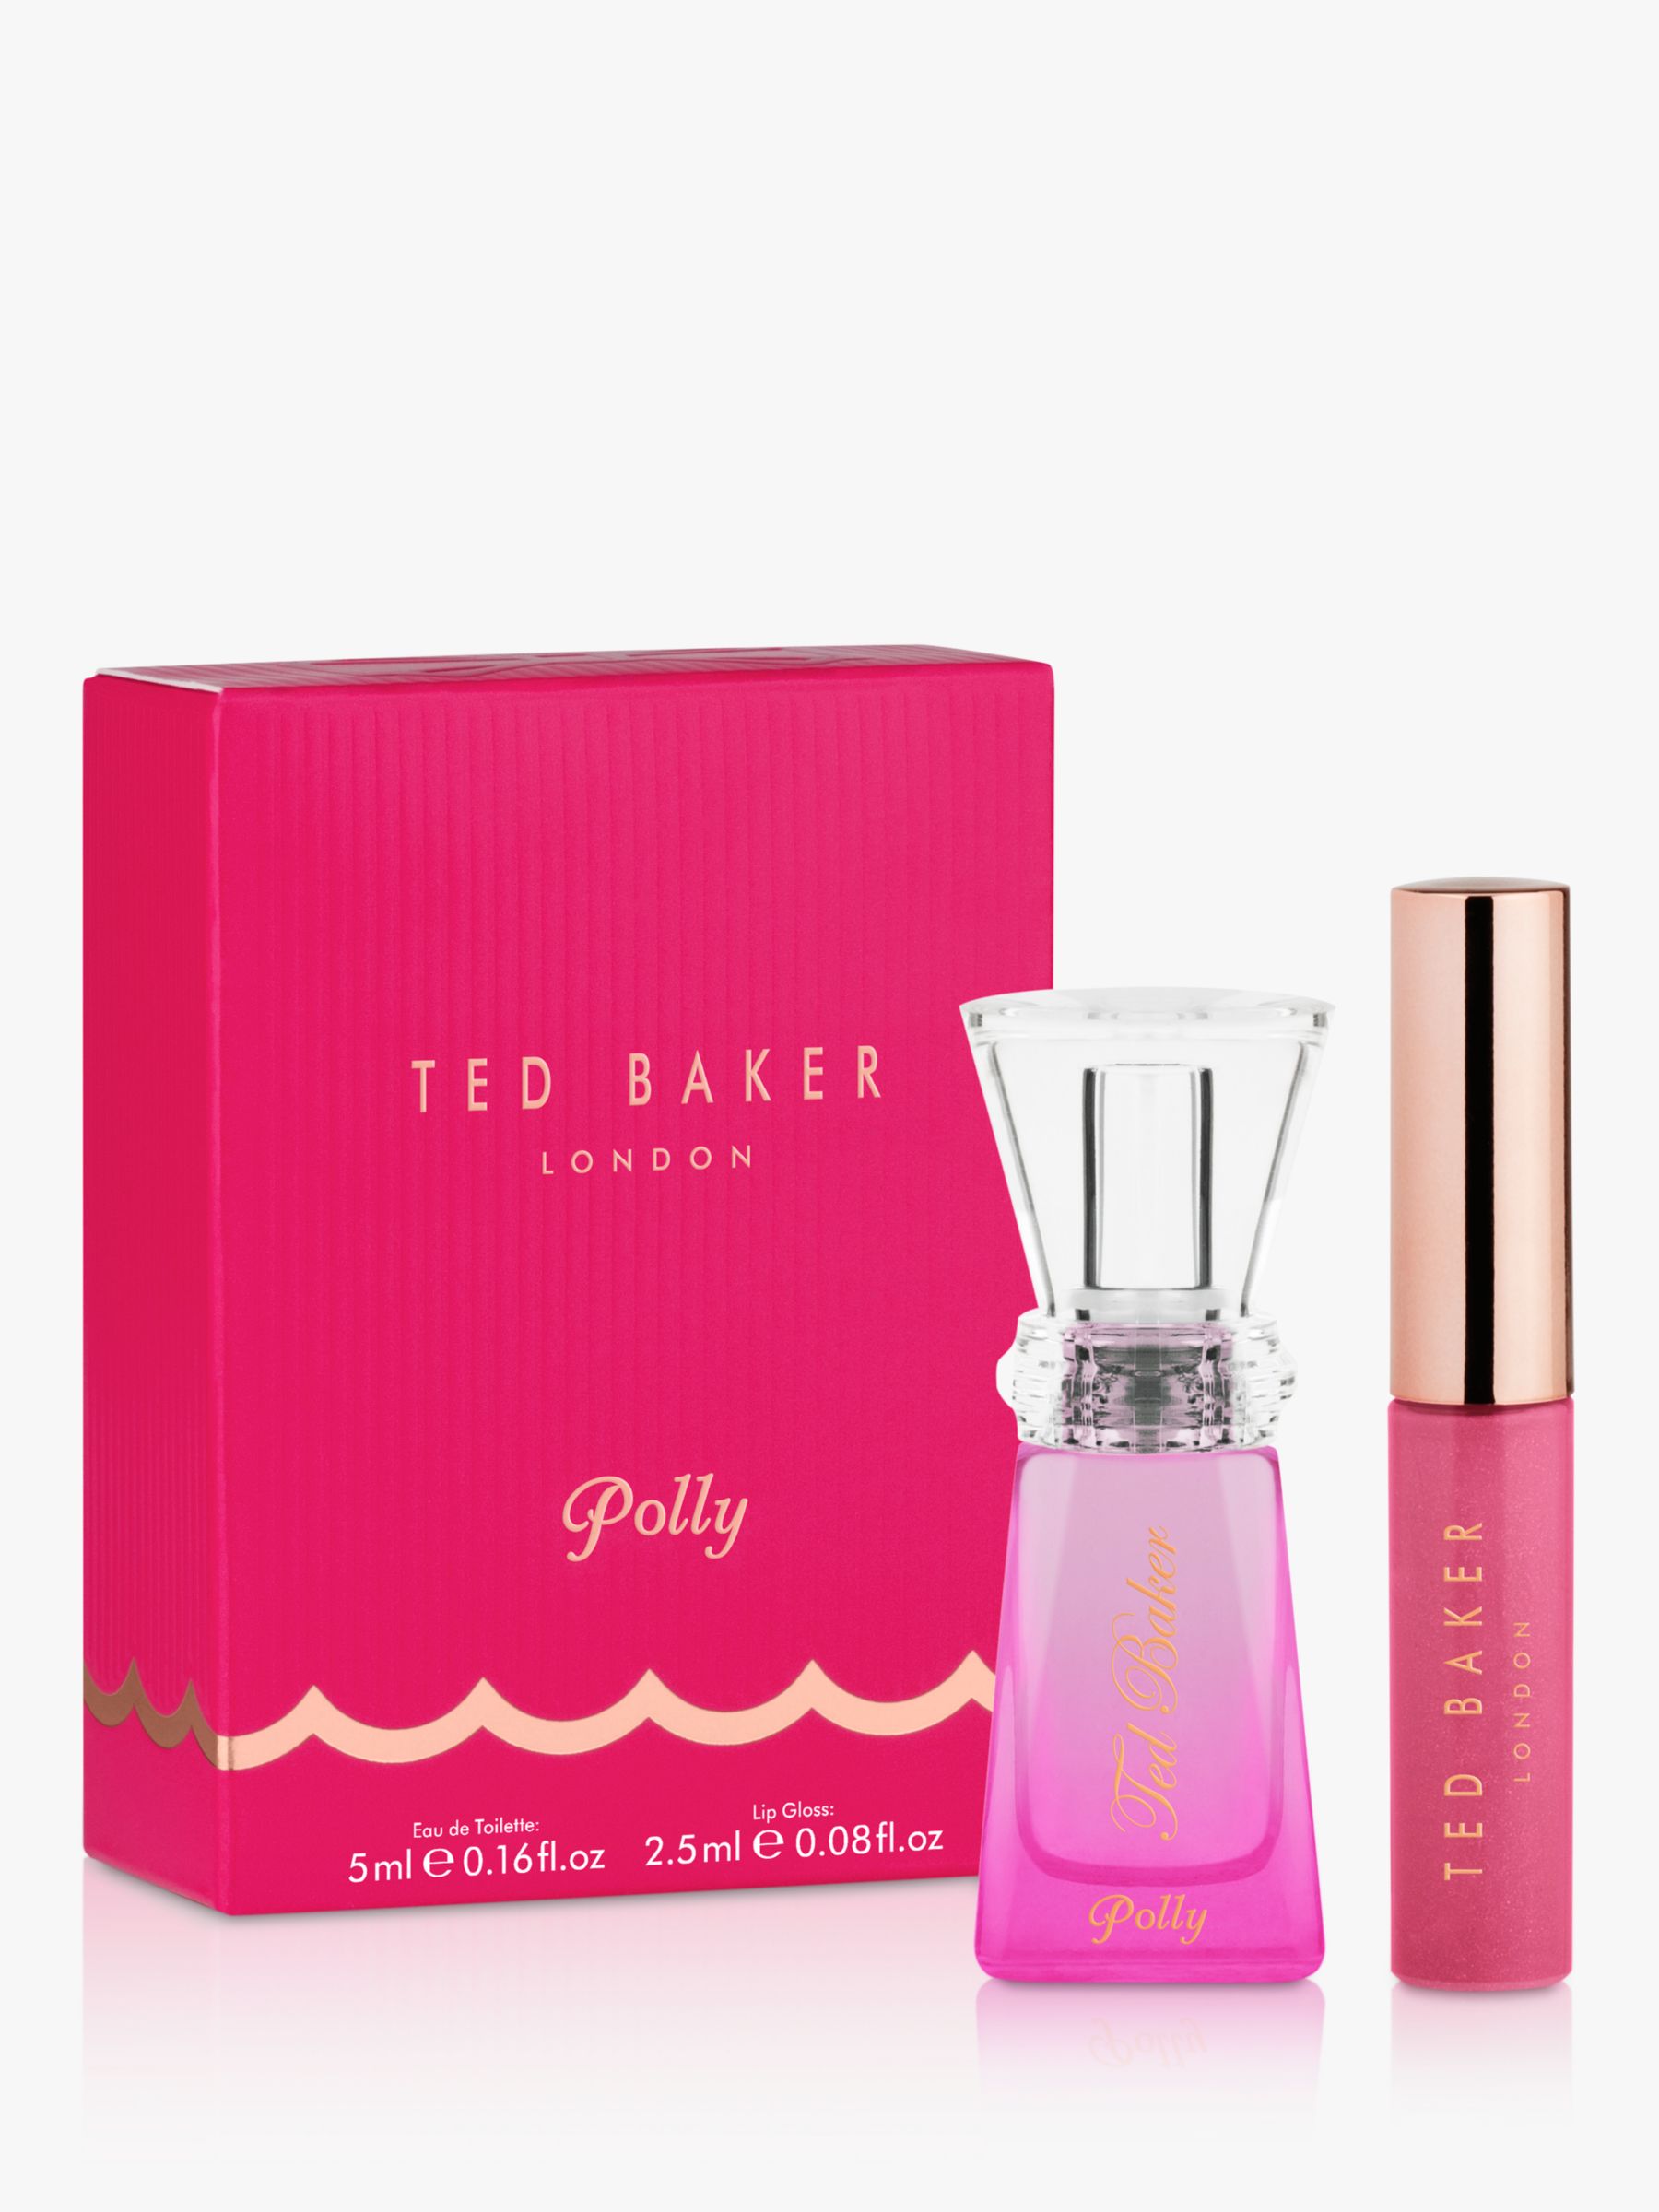 Ted Baker Sweet Things Come in Three Fragrance & Lip Gloss Gift Set